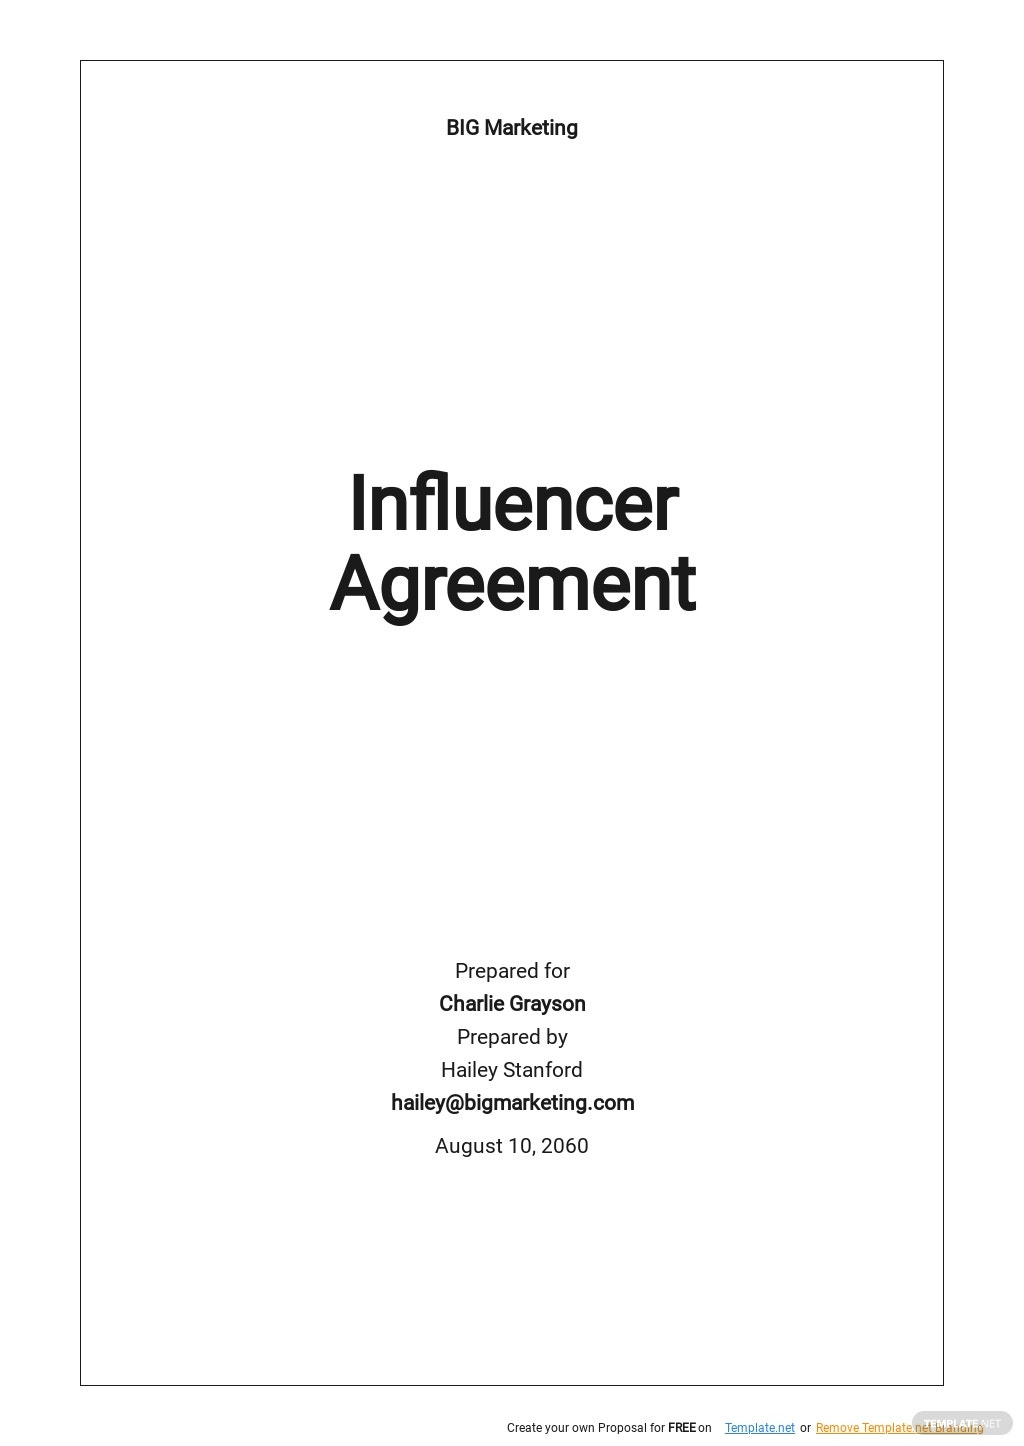 Influencer Marketing Agreement Template - Google Docs, Word, Apple for Influencer Agreement Contract Template